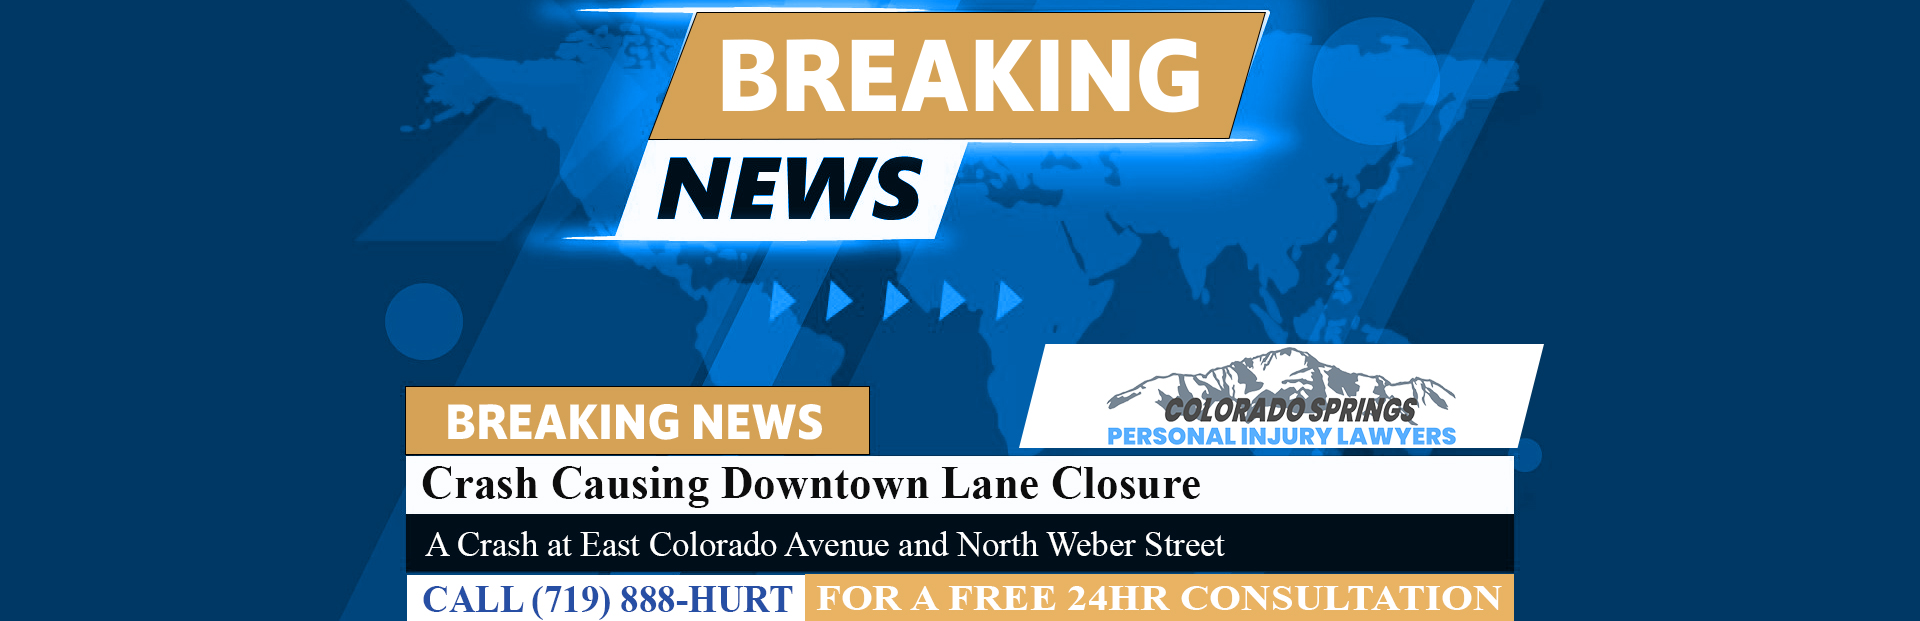 [12-25-23] Crash at E Colorado Ave and N Weber St Causing Downtown Lane Closure